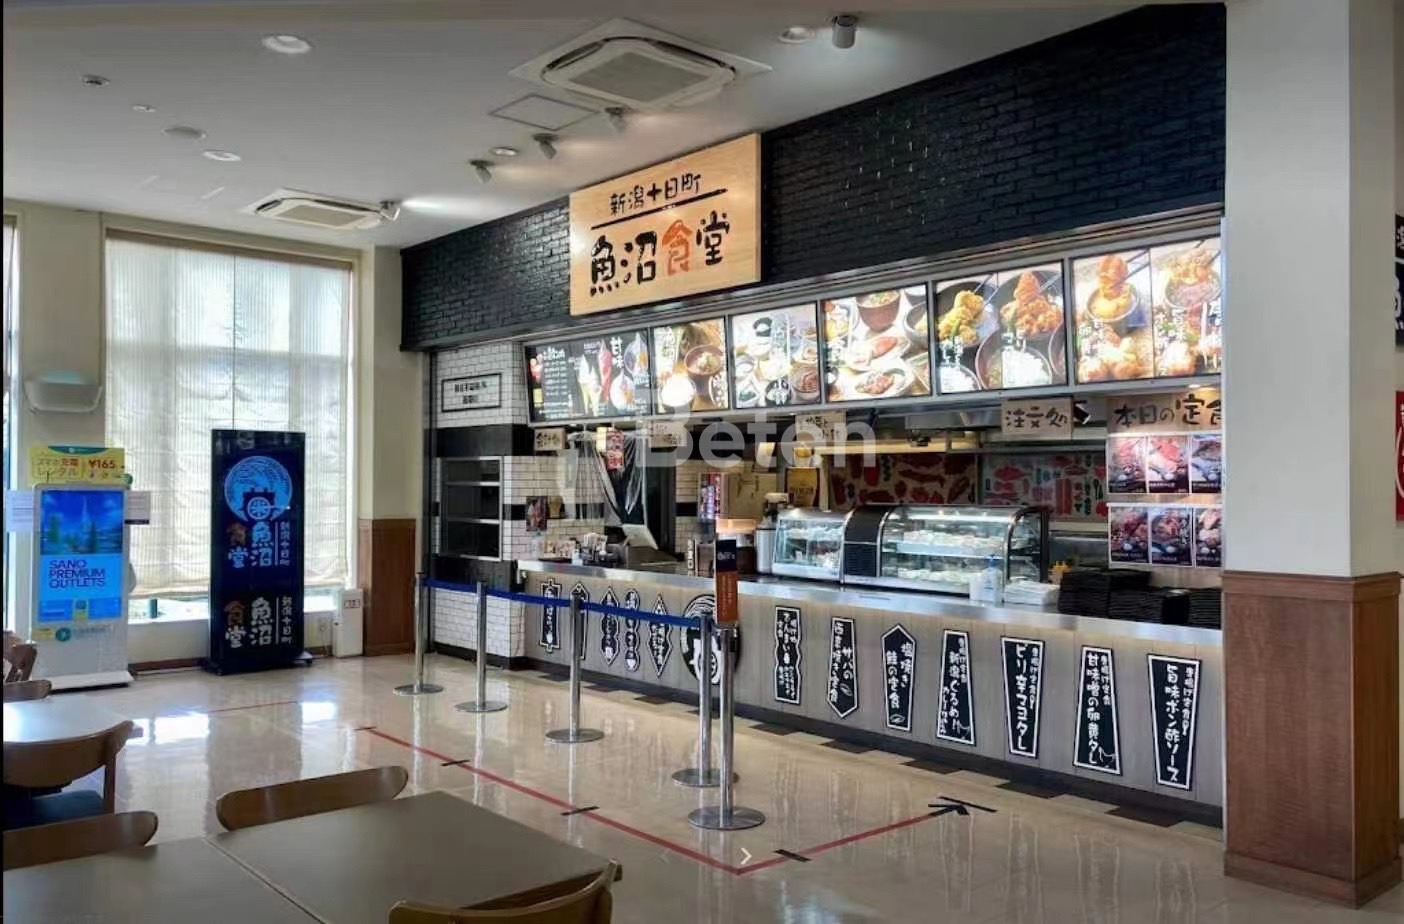 Beten Digital Signages are deployed in Japan-7